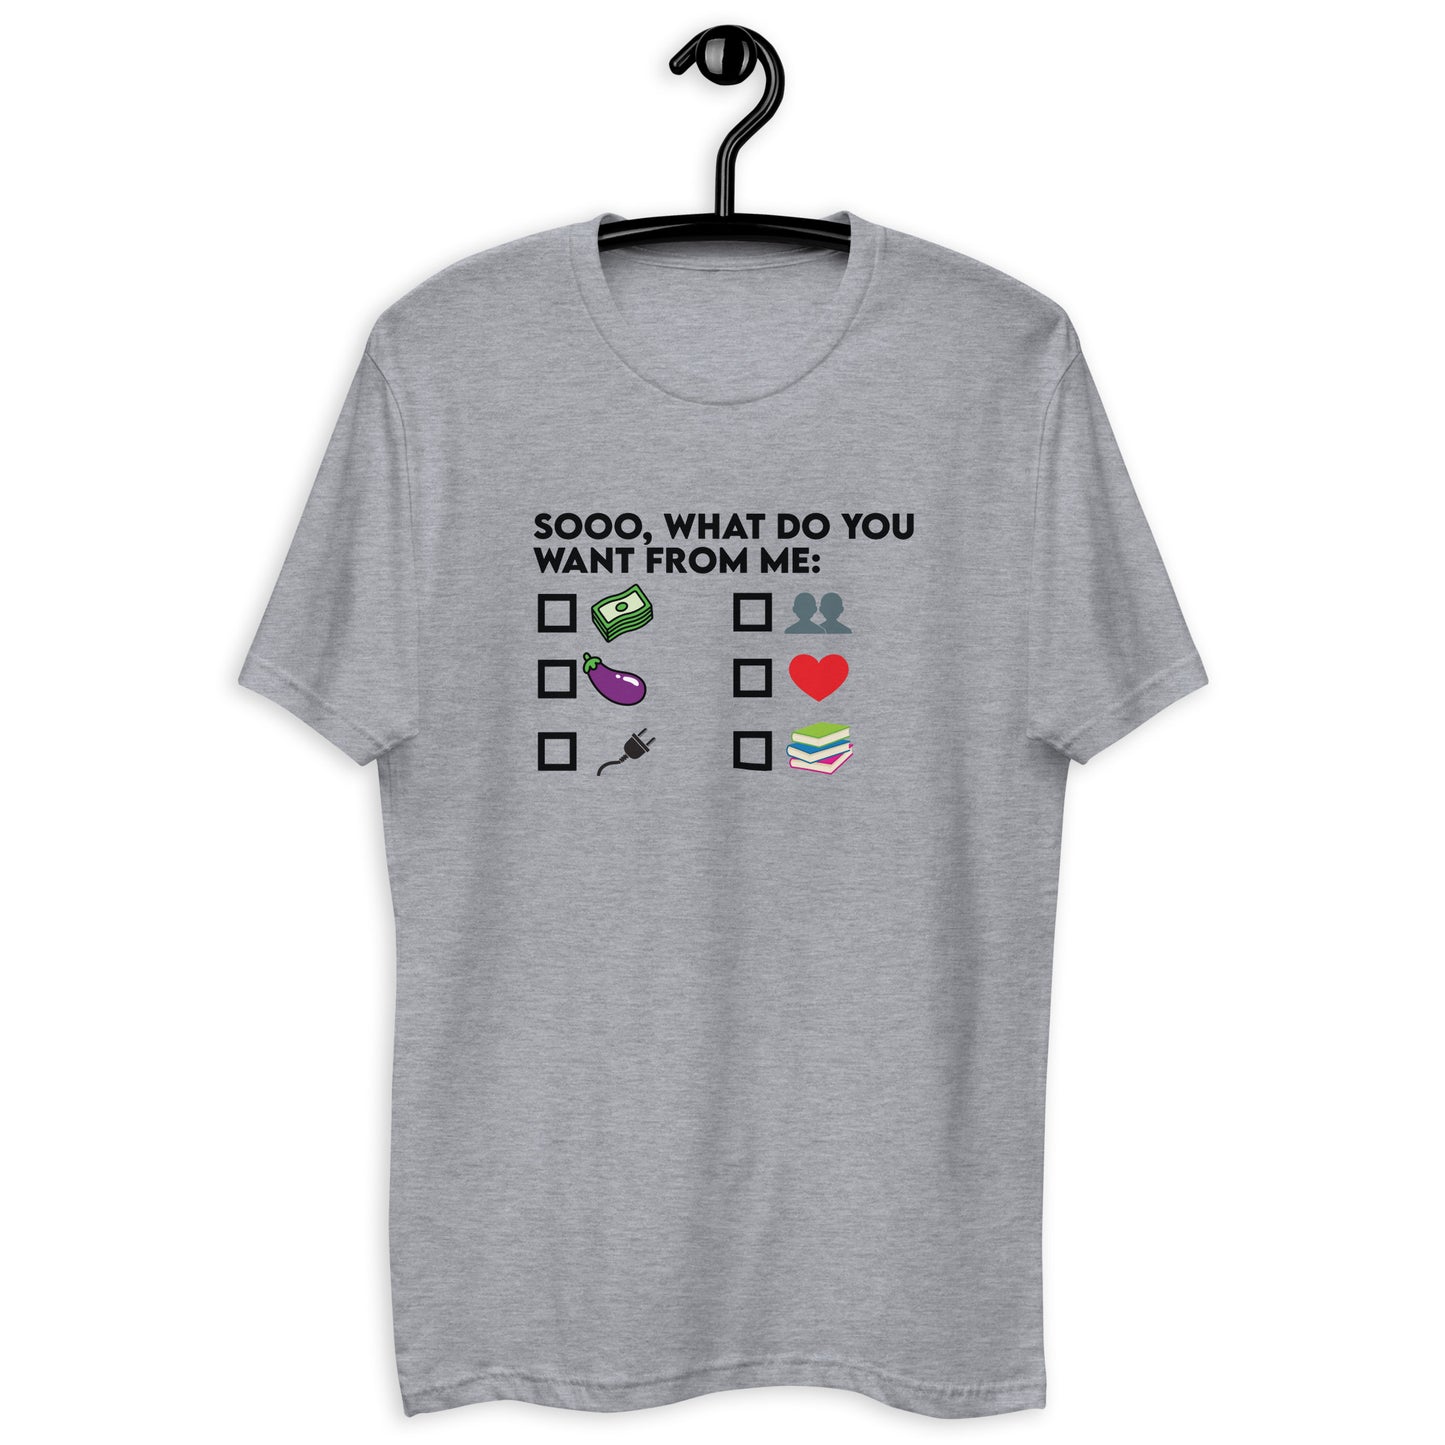 What Do You Want From ME Tee